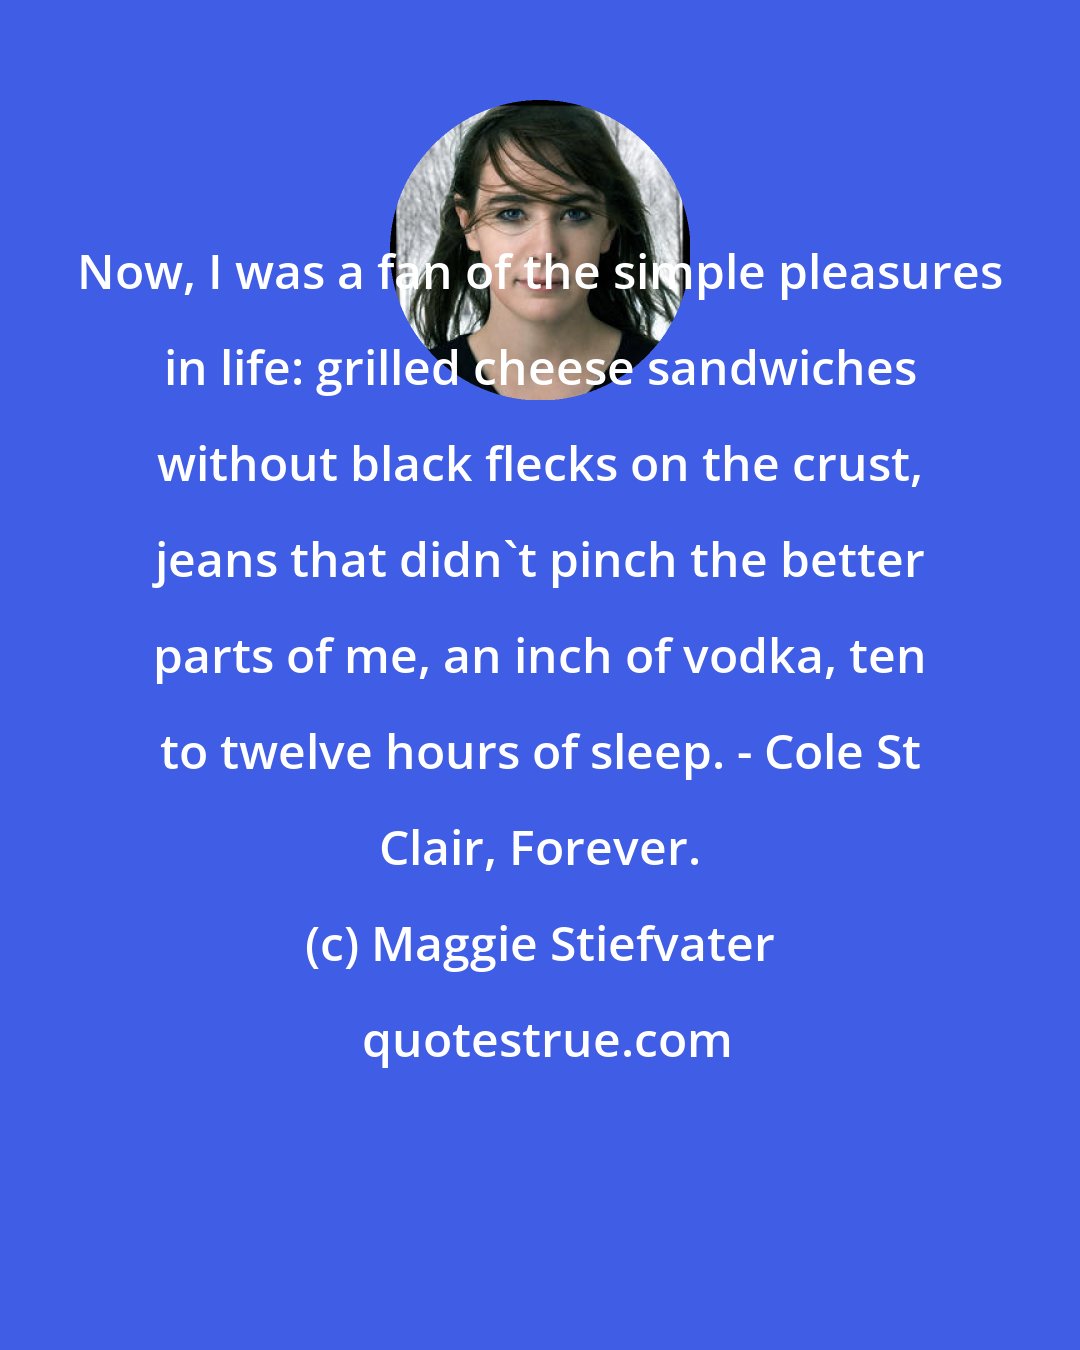 Maggie Stiefvater: Now, I was a fan of the simple pleasures in life: grilled cheese sandwiches without black flecks on the crust, jeans that didn't pinch the better parts of me, an inch of vodka, ten to twelve hours of sleep. - Cole St Clair, Forever.